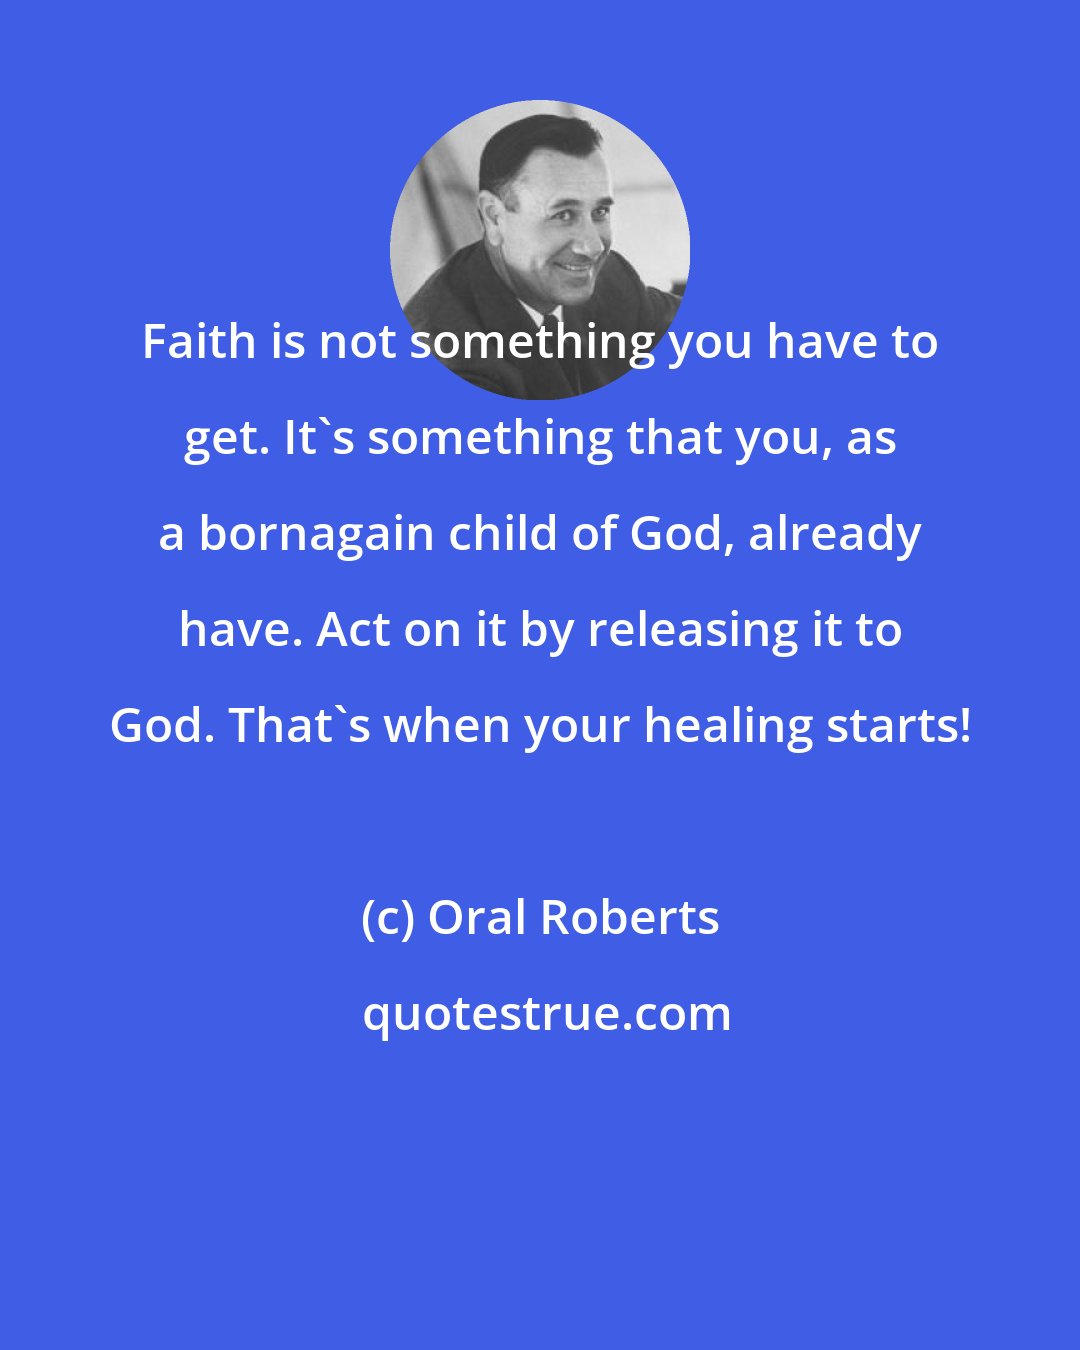 Oral Roberts: Faith is not something you have to get. It's something that you, as a bornagain child of God, already have. Act on it by releasing it to God. That's when your healing starts!